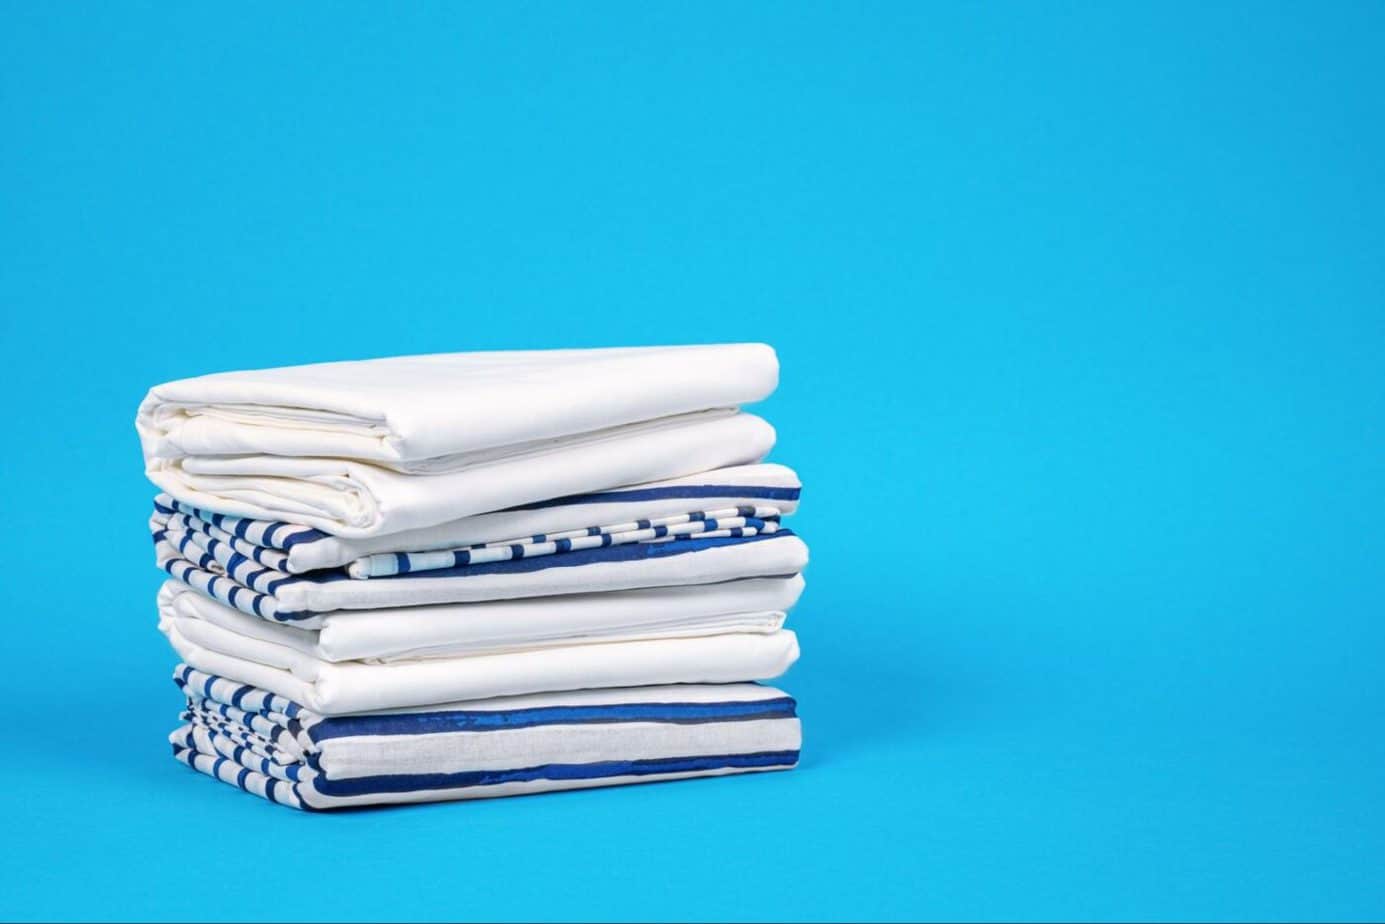 A Comprehensive Comparison: Tencel vs Percale vs Sateen - Which Fabric Is the Best for Your Sheets? 2